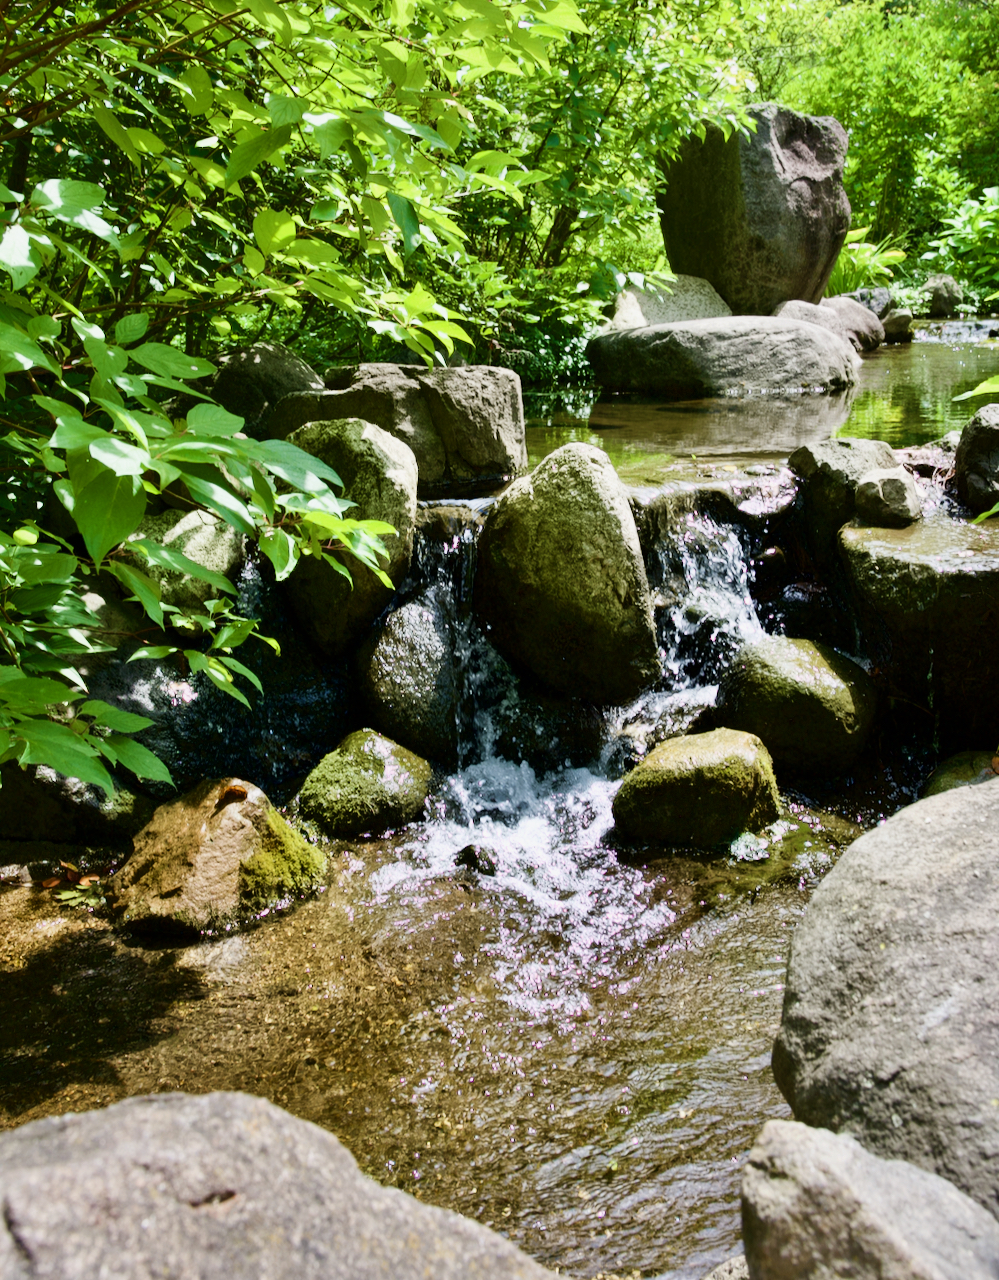 A stream with a little waterfall.